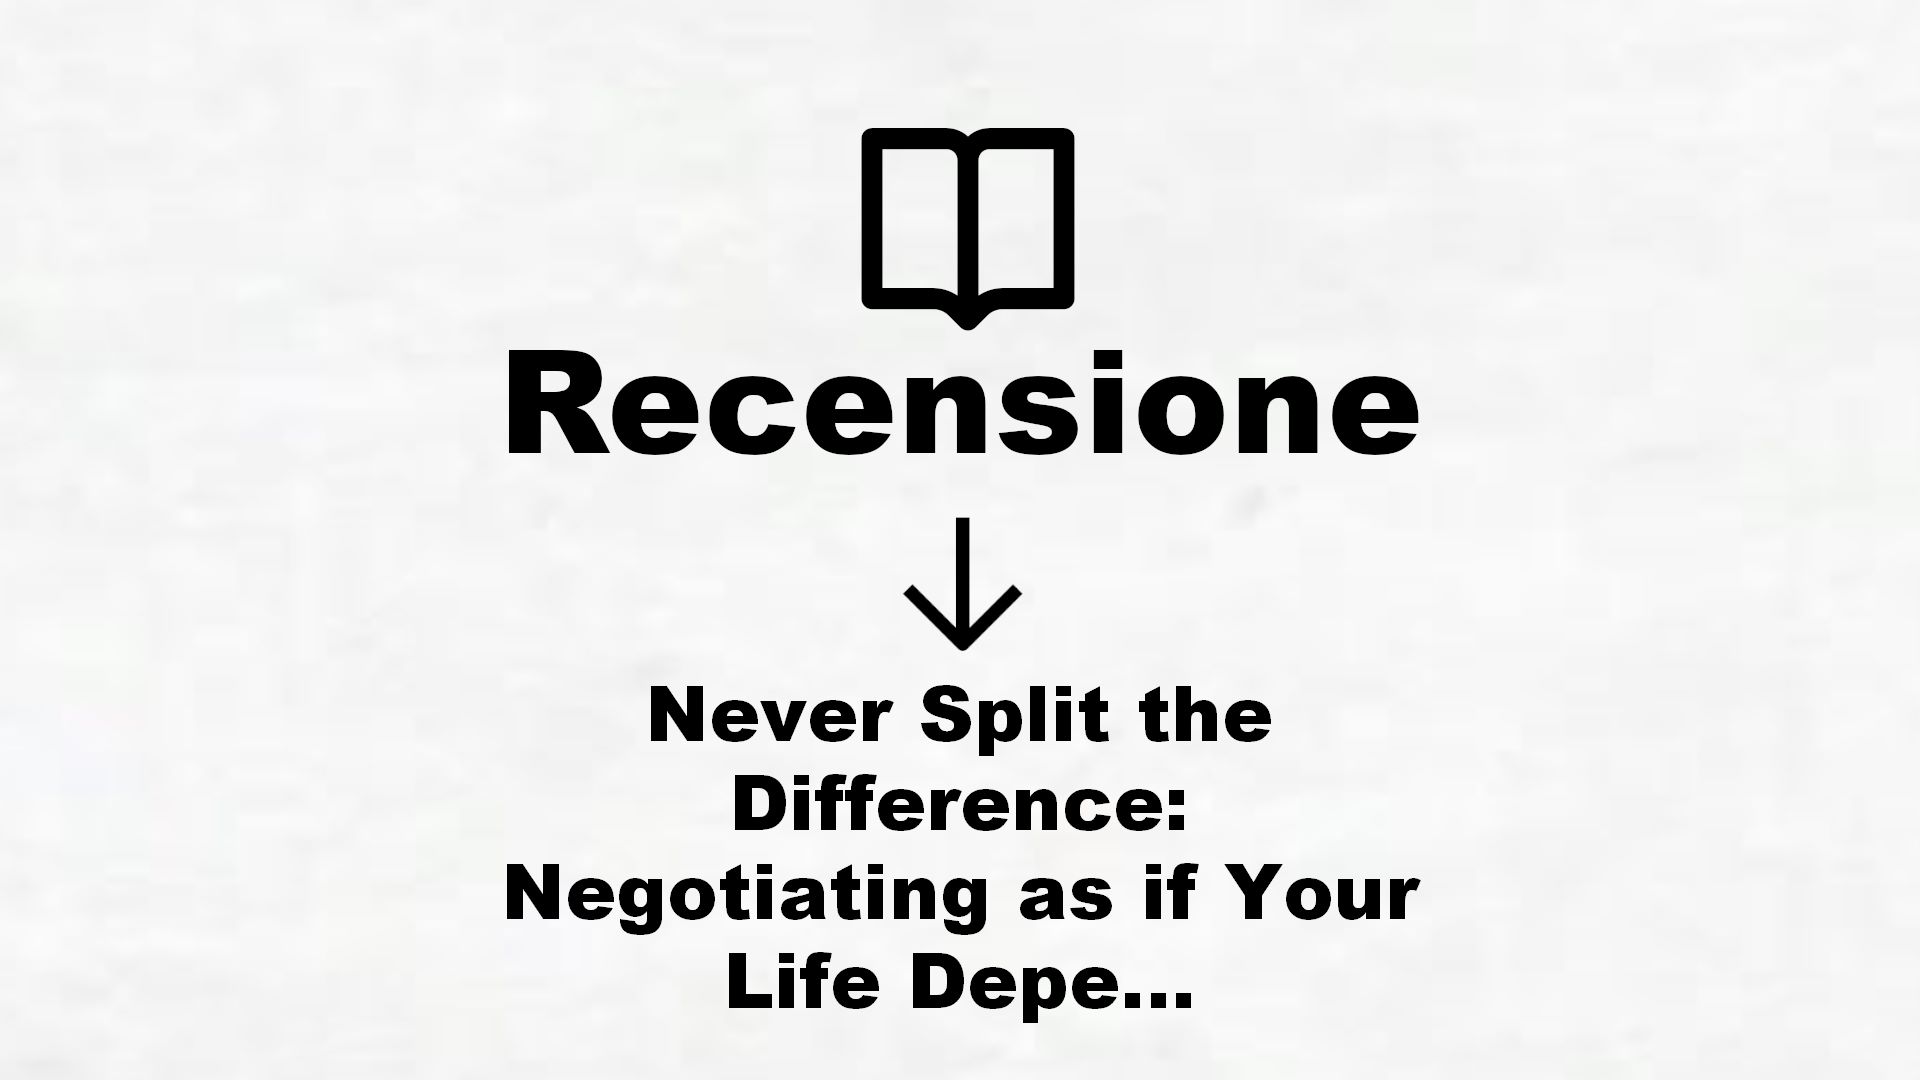 Never Split the Difference: Negotiating as if Your Life Depended on It (English Edition) – Recensione Libro